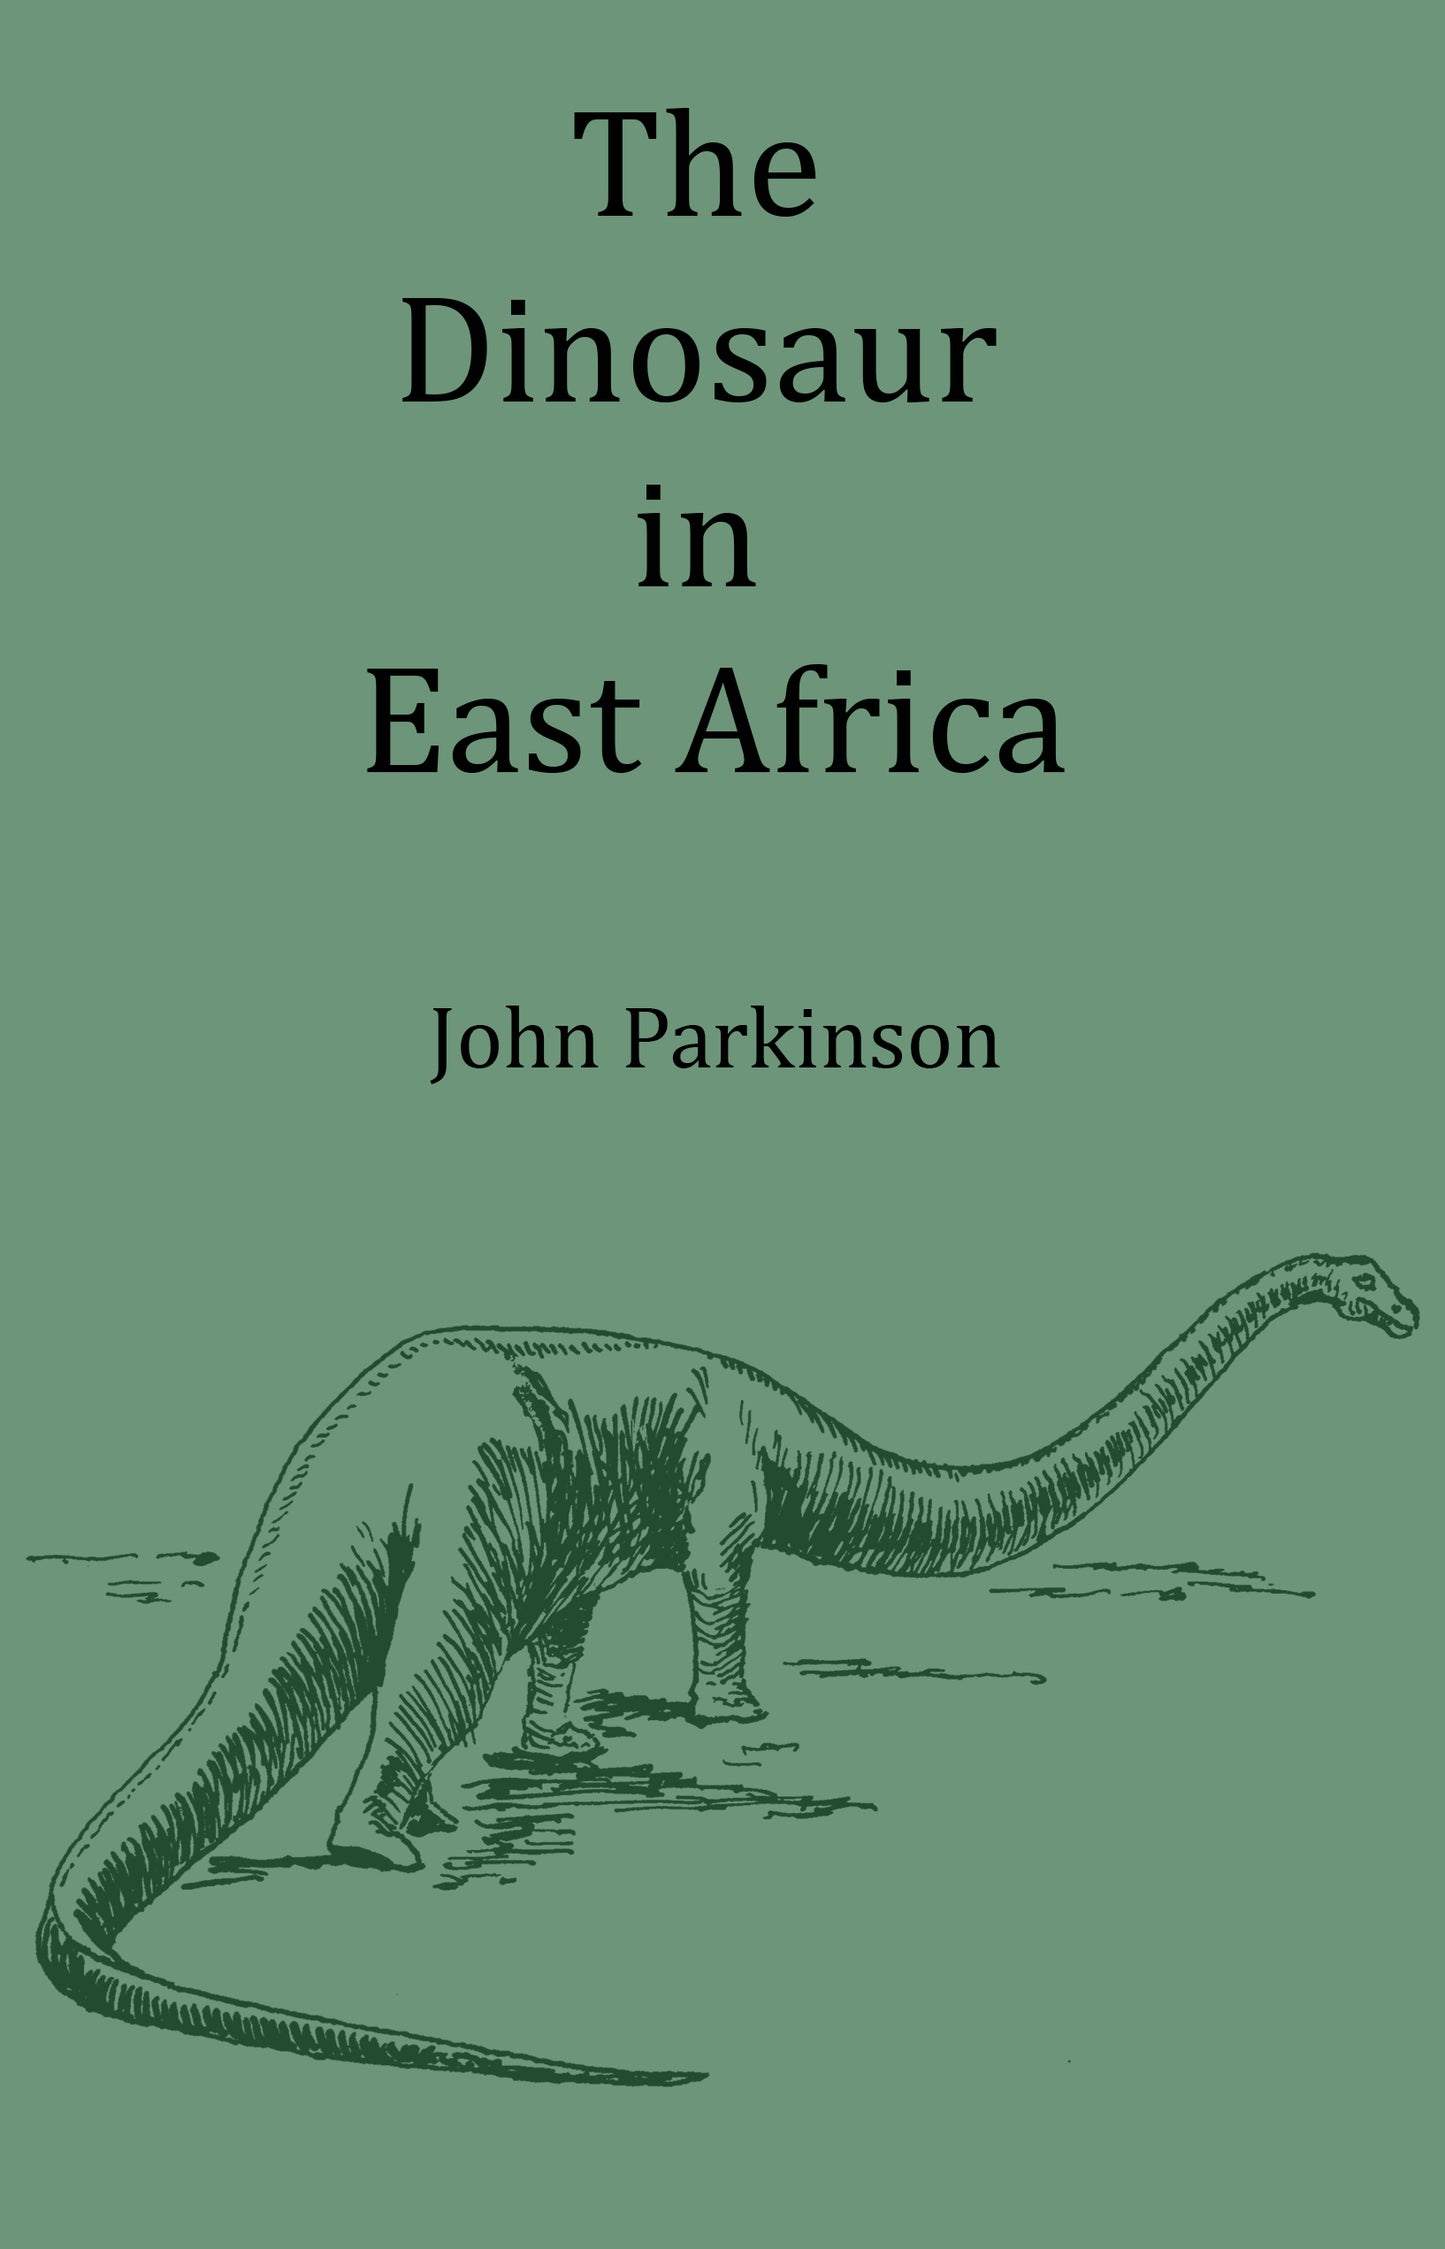 The Dinosaur in East Africa